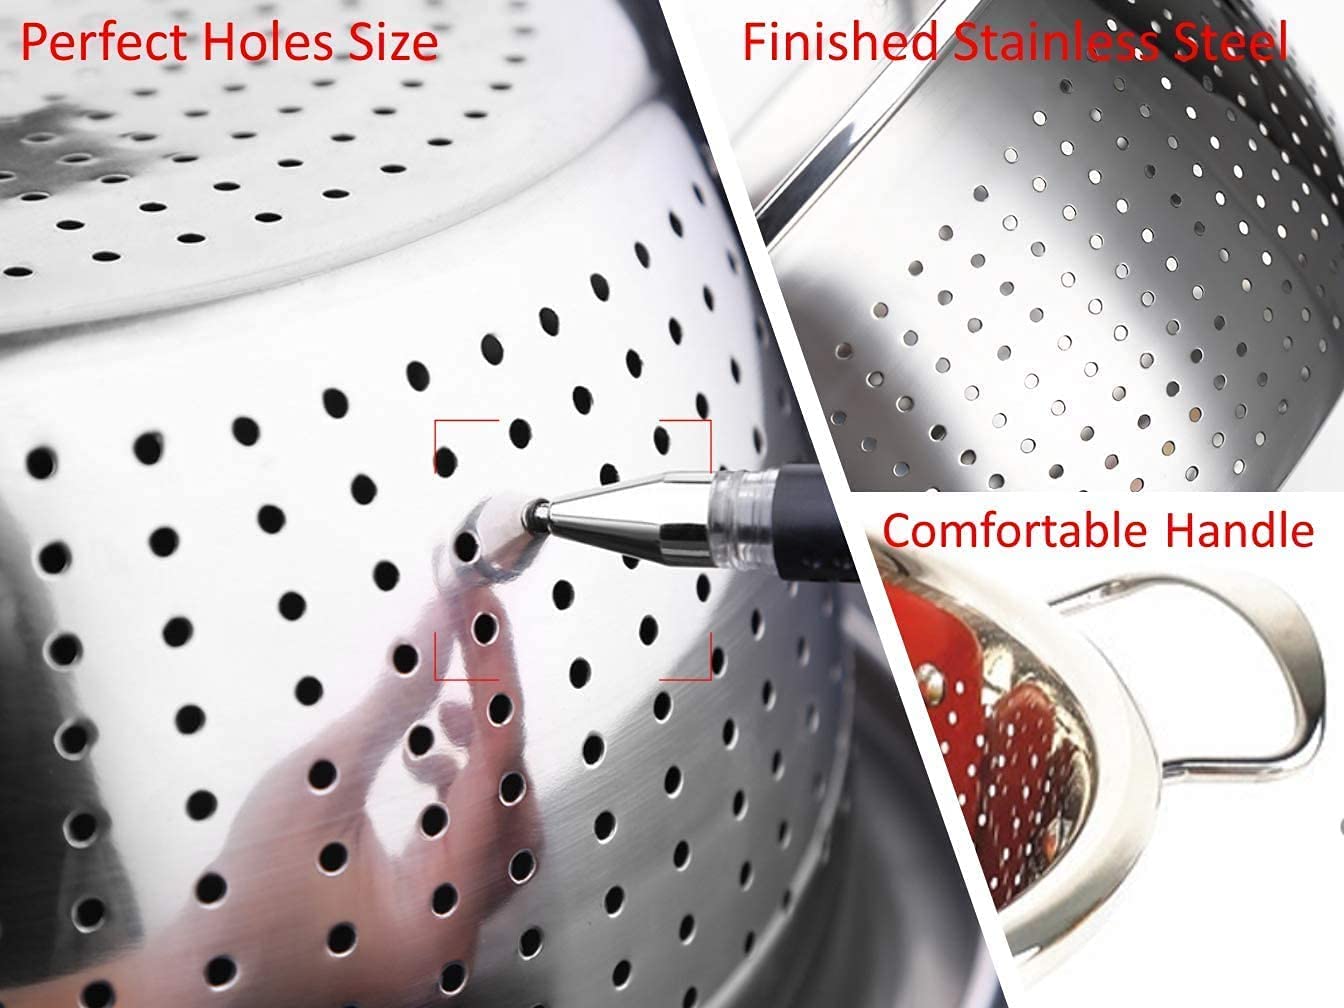 32cm Stainless Steel Colander With Handles